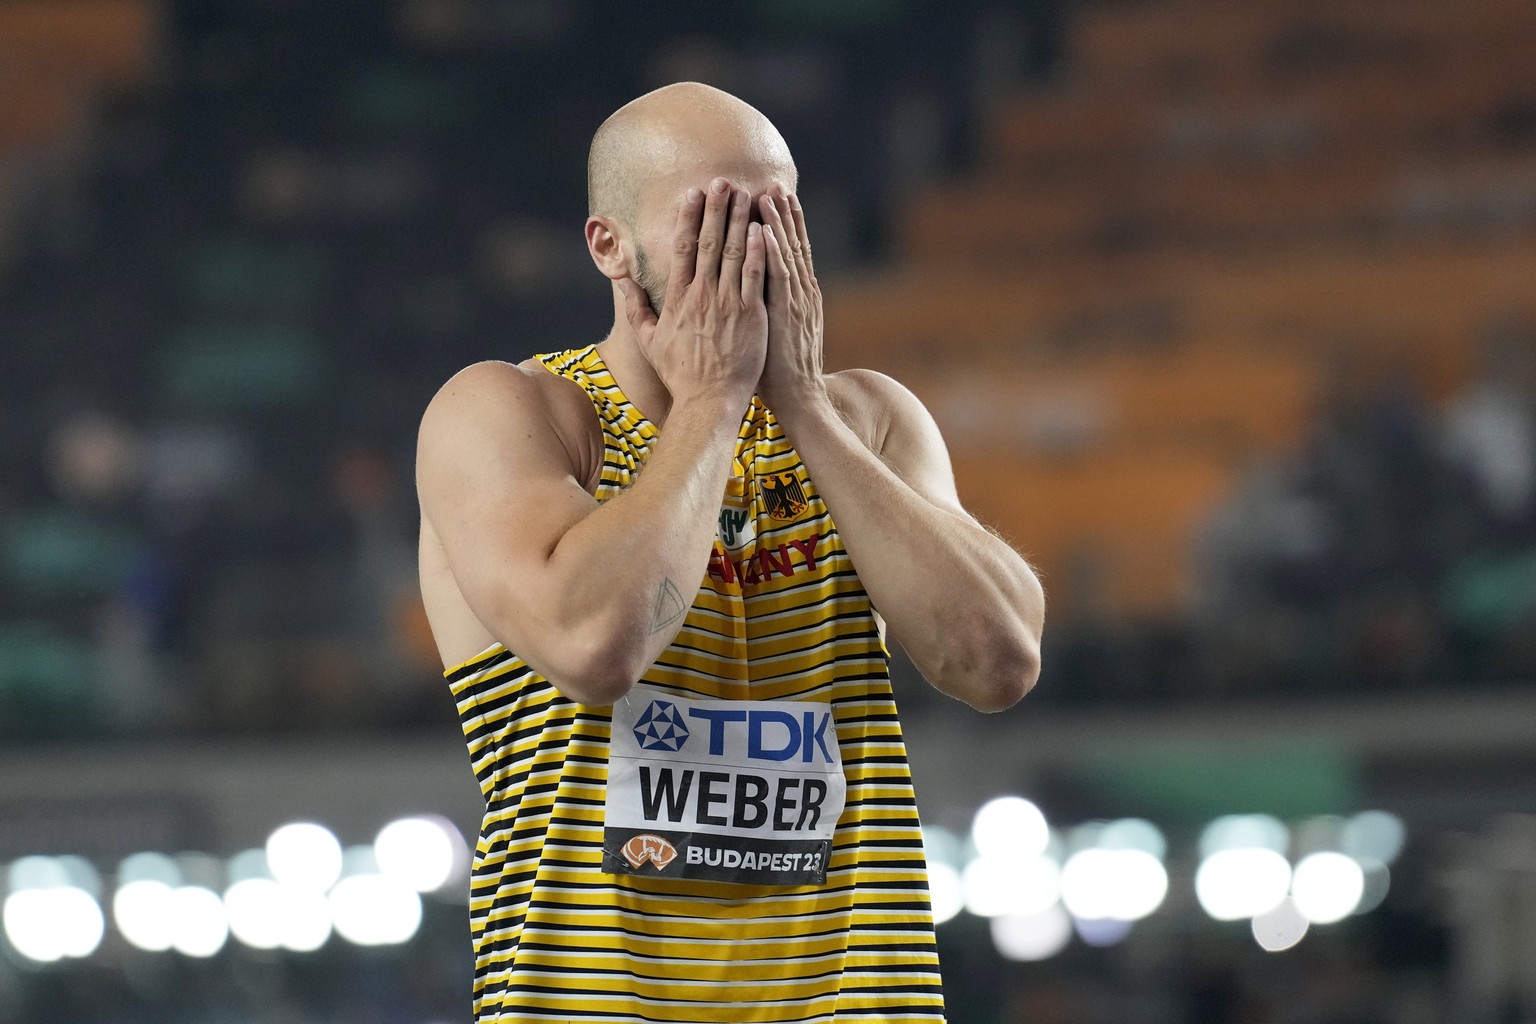 Julian Weber, of Germany, reacts after an attempt in the Men&#039;s javelin throw final during the World Athletics Championships in Budapest, Hungary, Sunday, Aug. 27, 2023. (AP Photo/Matthias Schrade ...